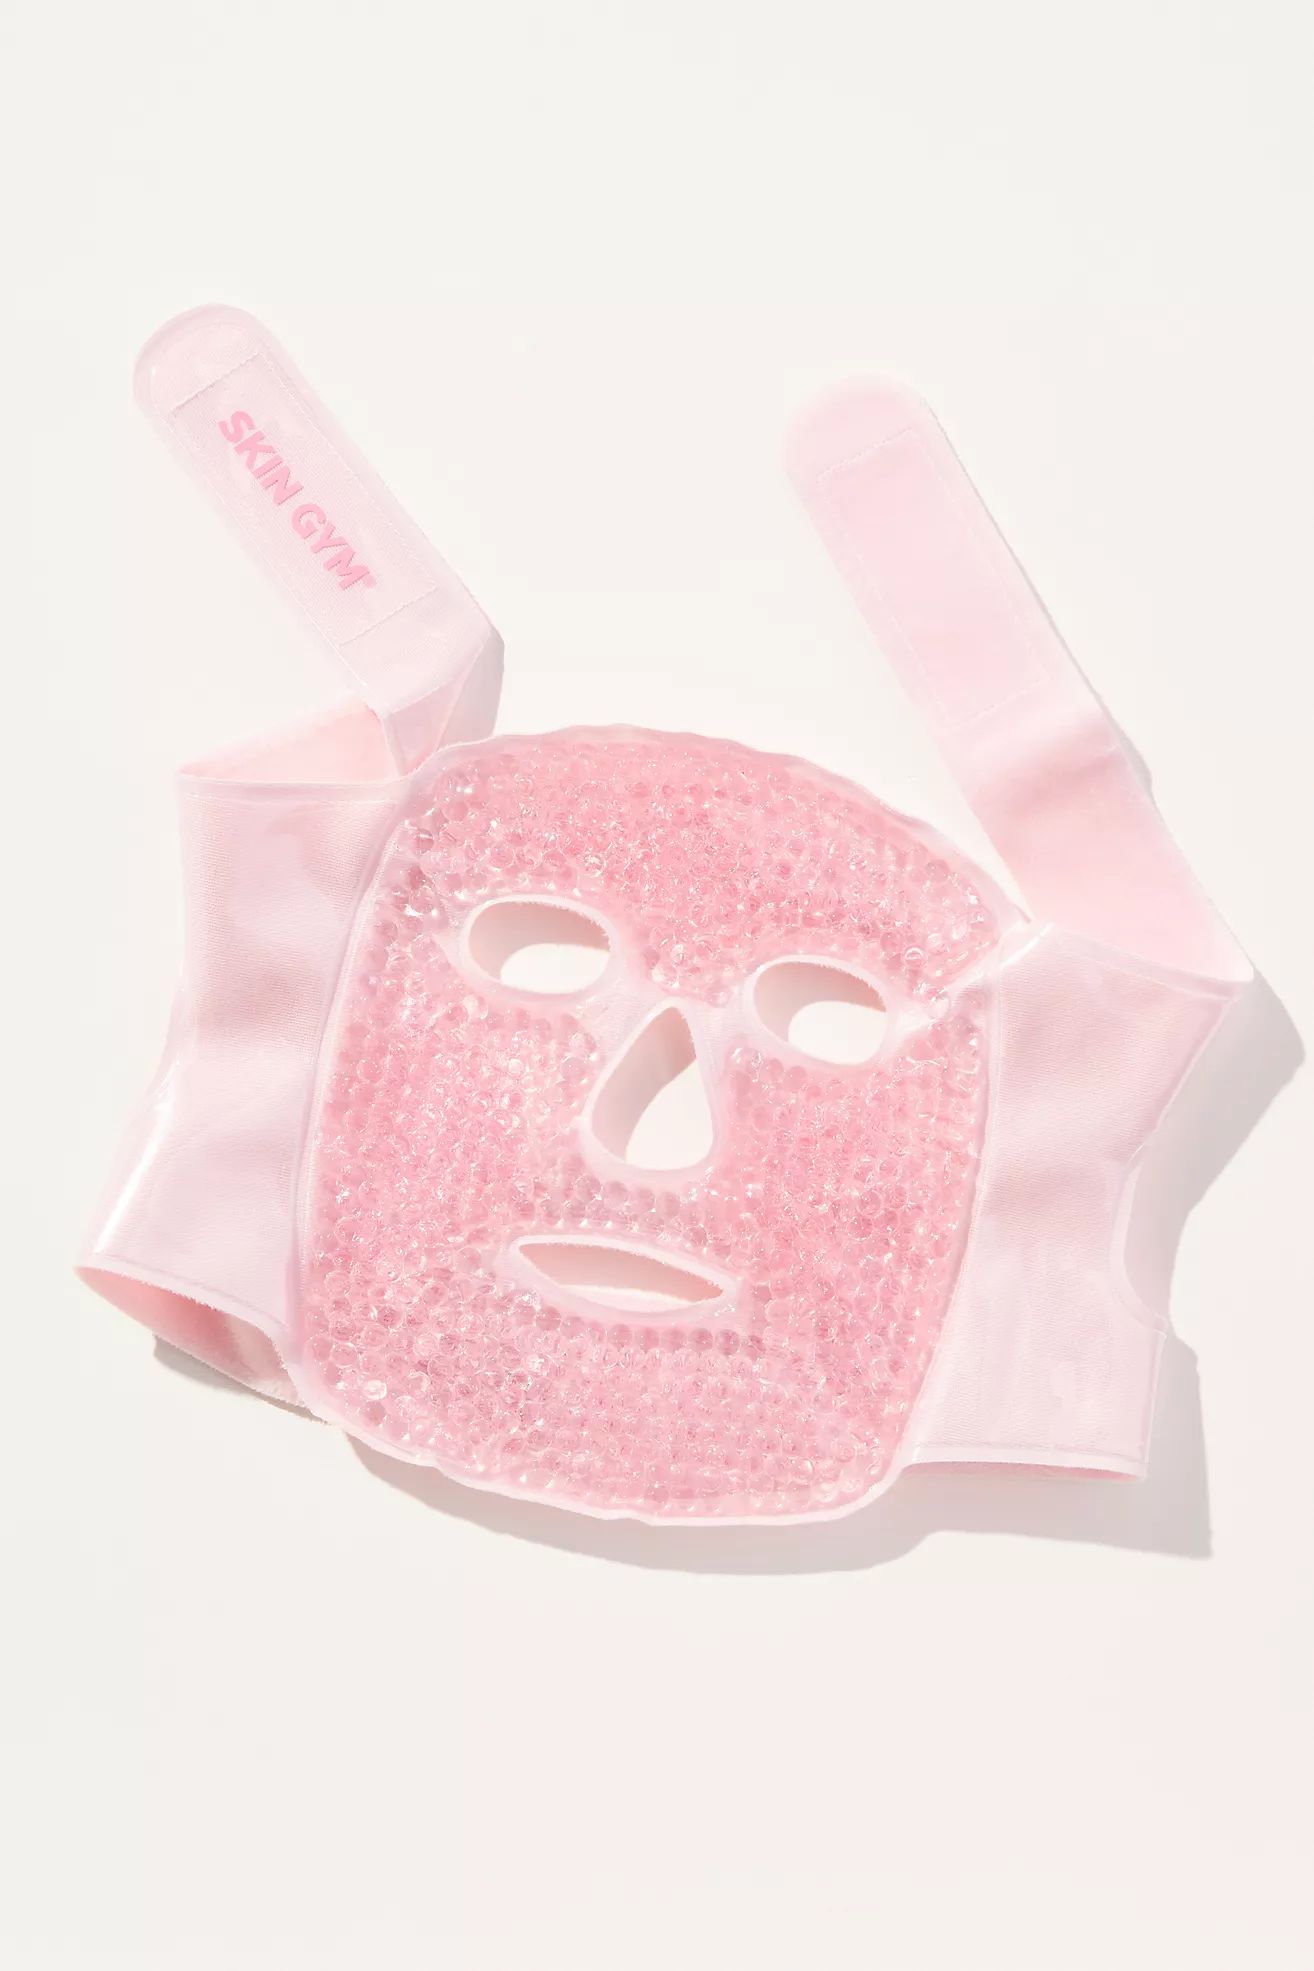 Skin Gym Cryo Chill Ice Beaded Face Mask | Anthropologie (US)